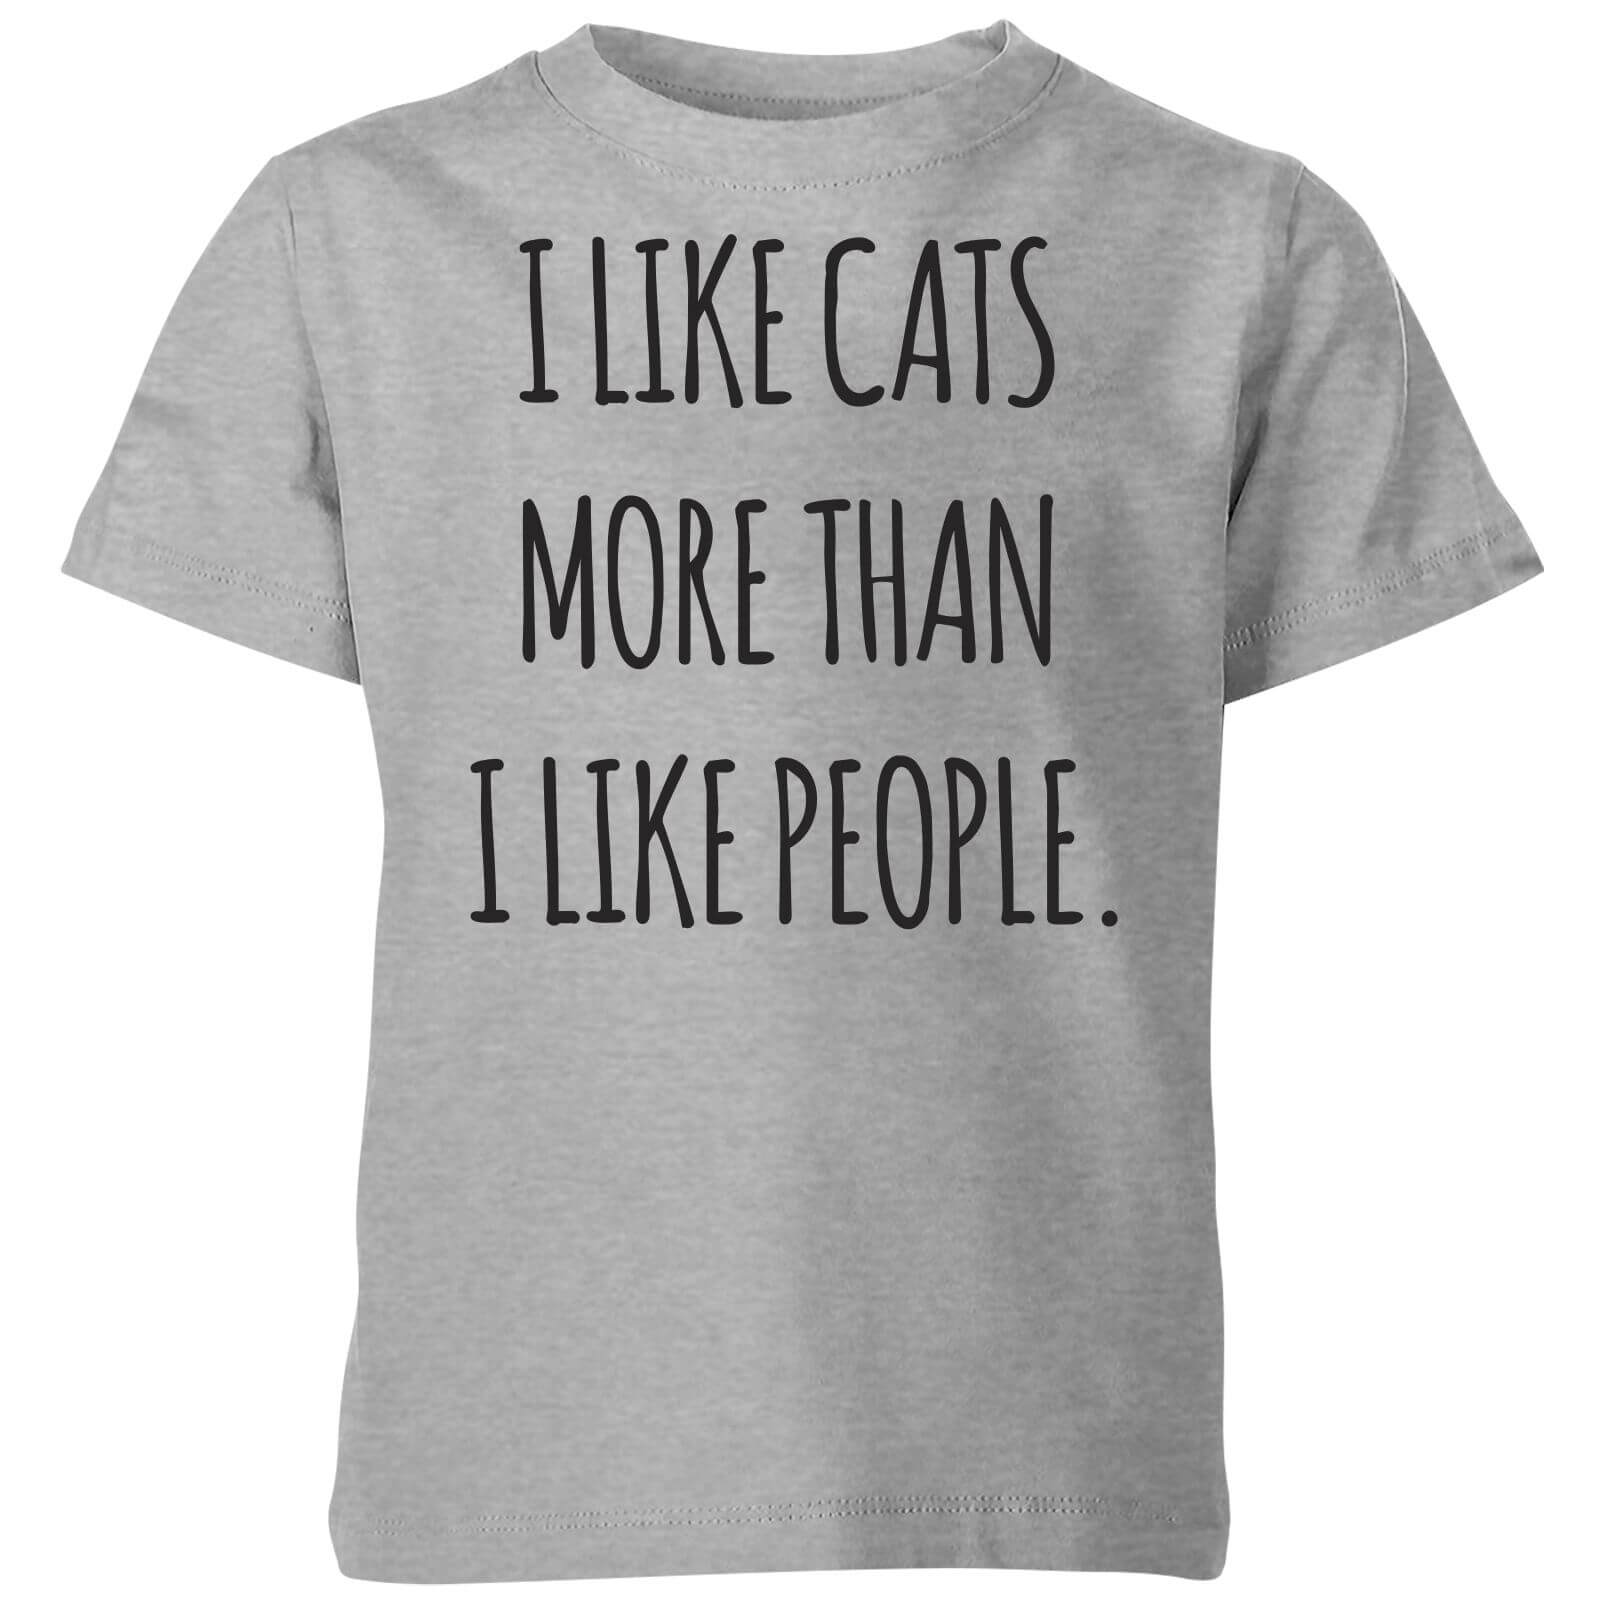 I Like Cats More Than People Kids' T-Shirt - Grey - 3-4 Years - Grey